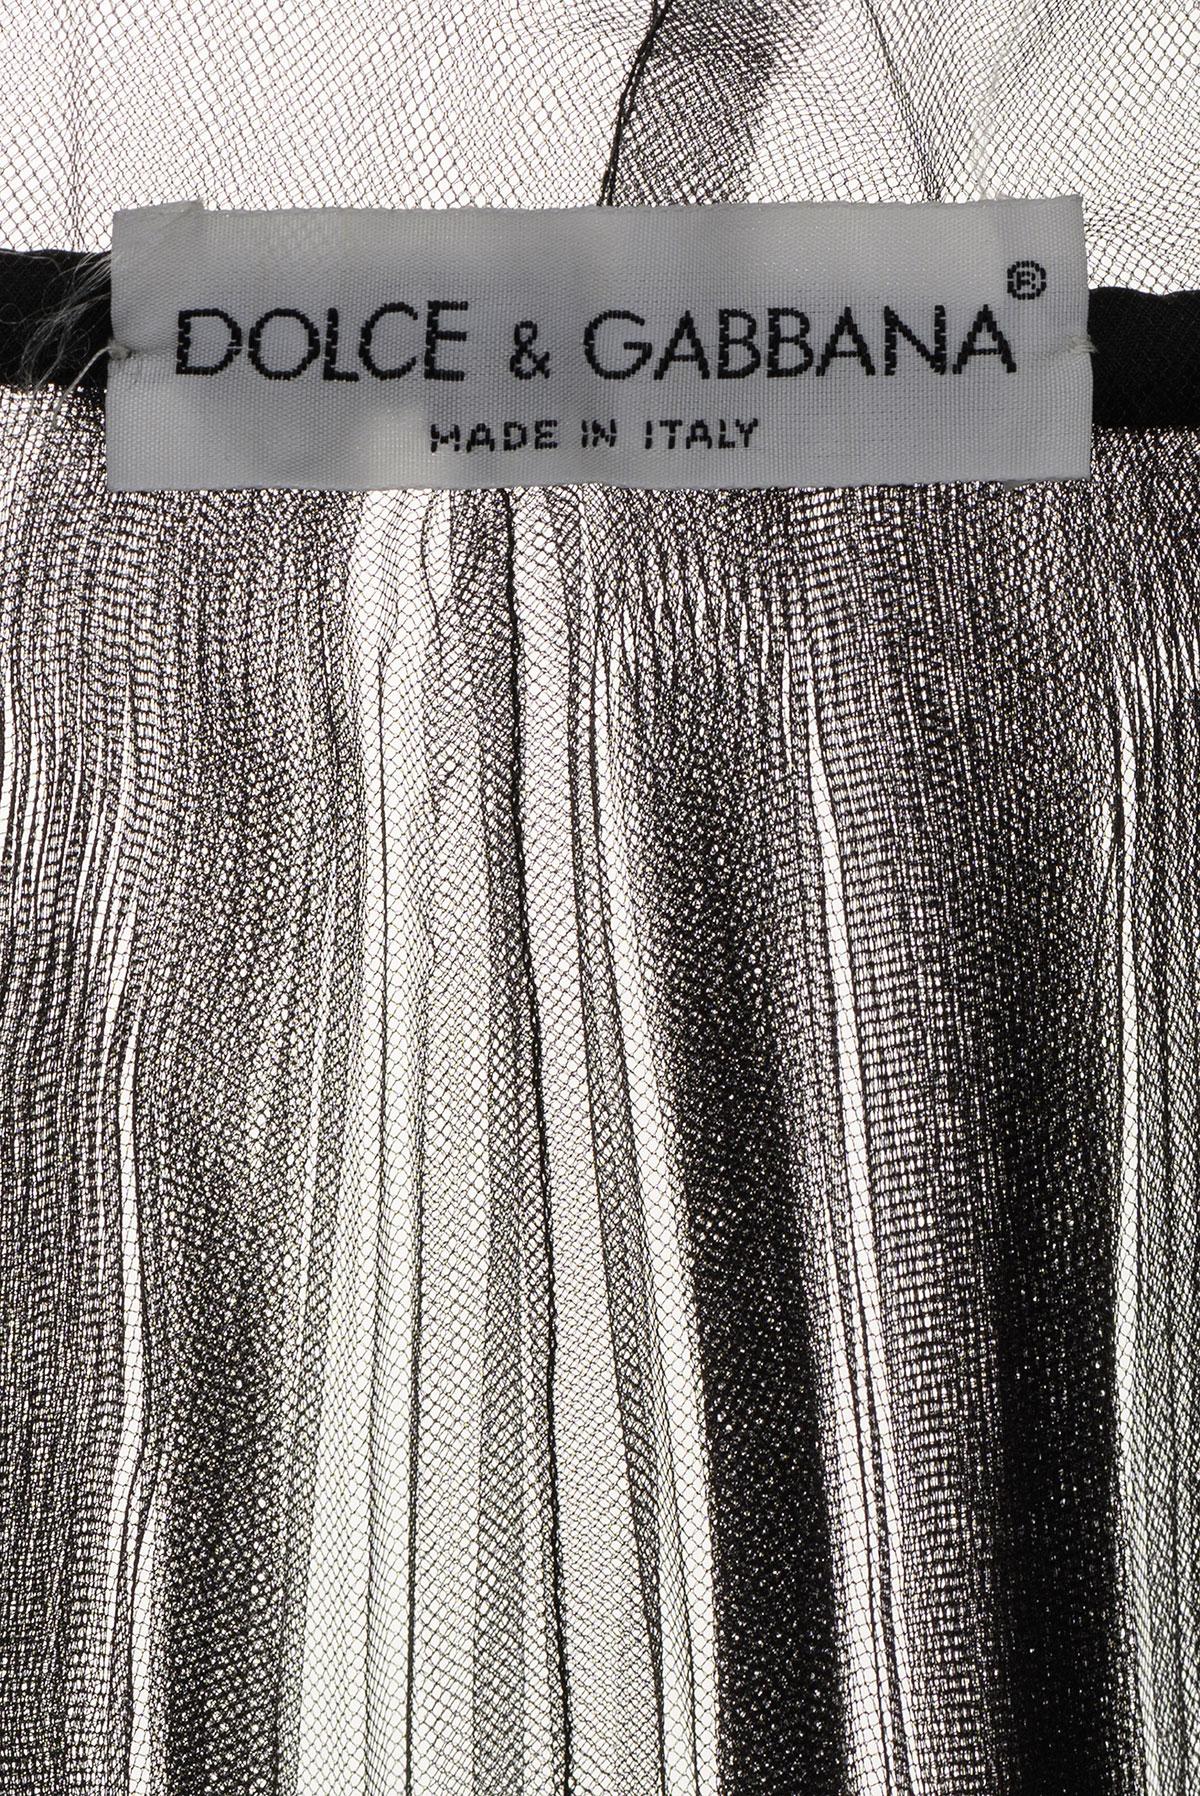 DOLCE & GABBANA SS 92 Rare and Iconic Tulle Minidress For Sale 1